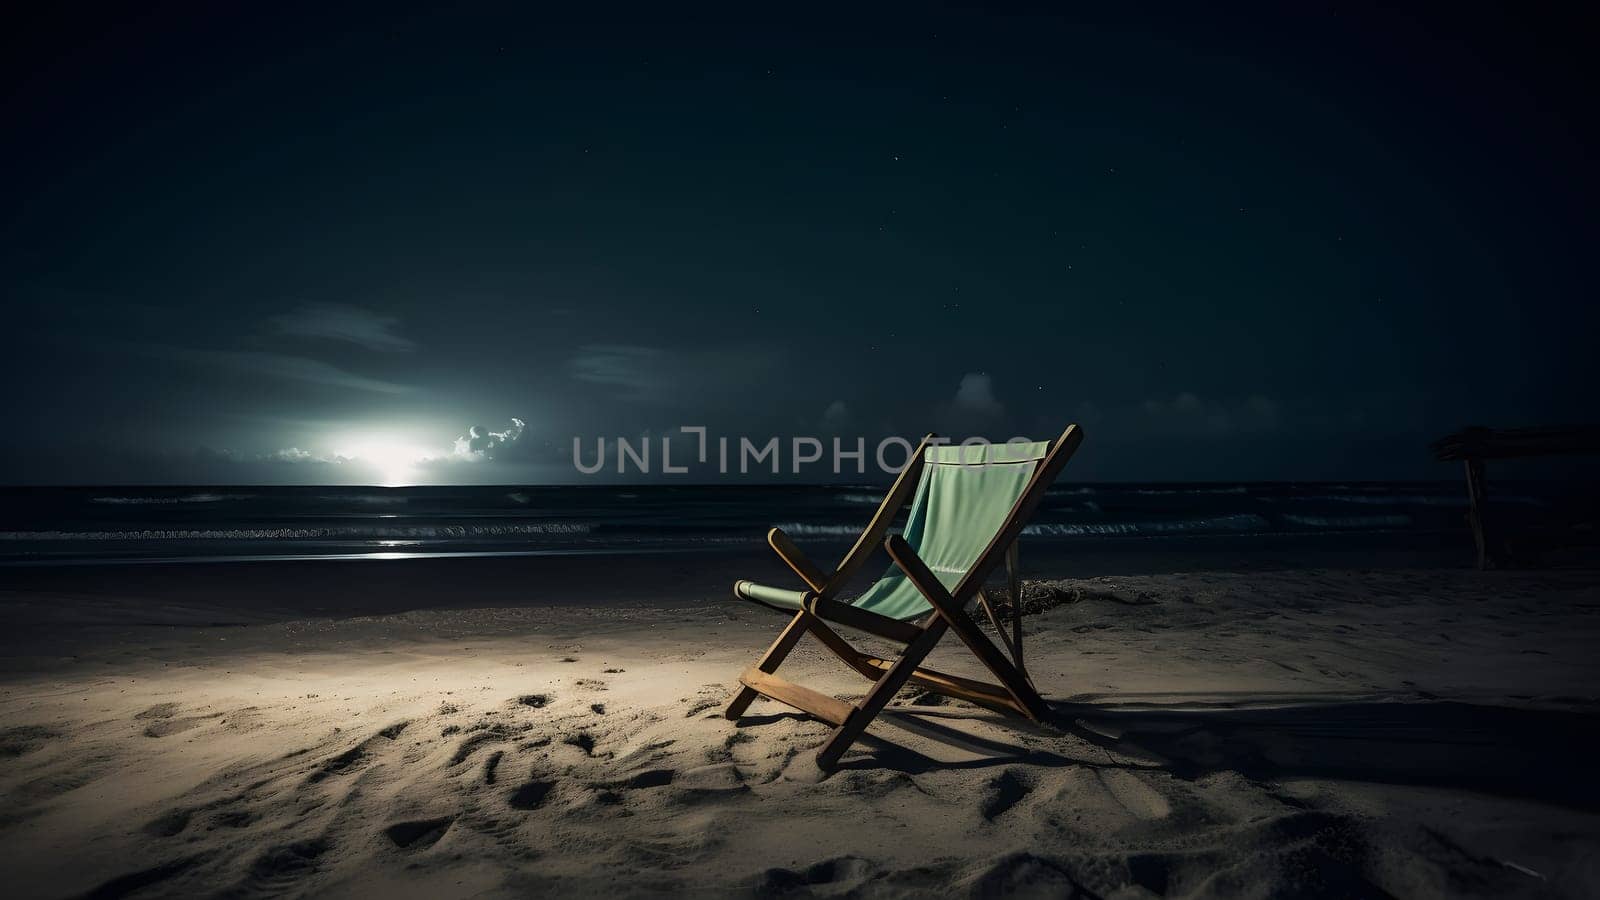 Empty beach chair on sand beach at night - summer vacation theme. Neural network generated in May 2023. Not based on any actual person, scene or pattern.